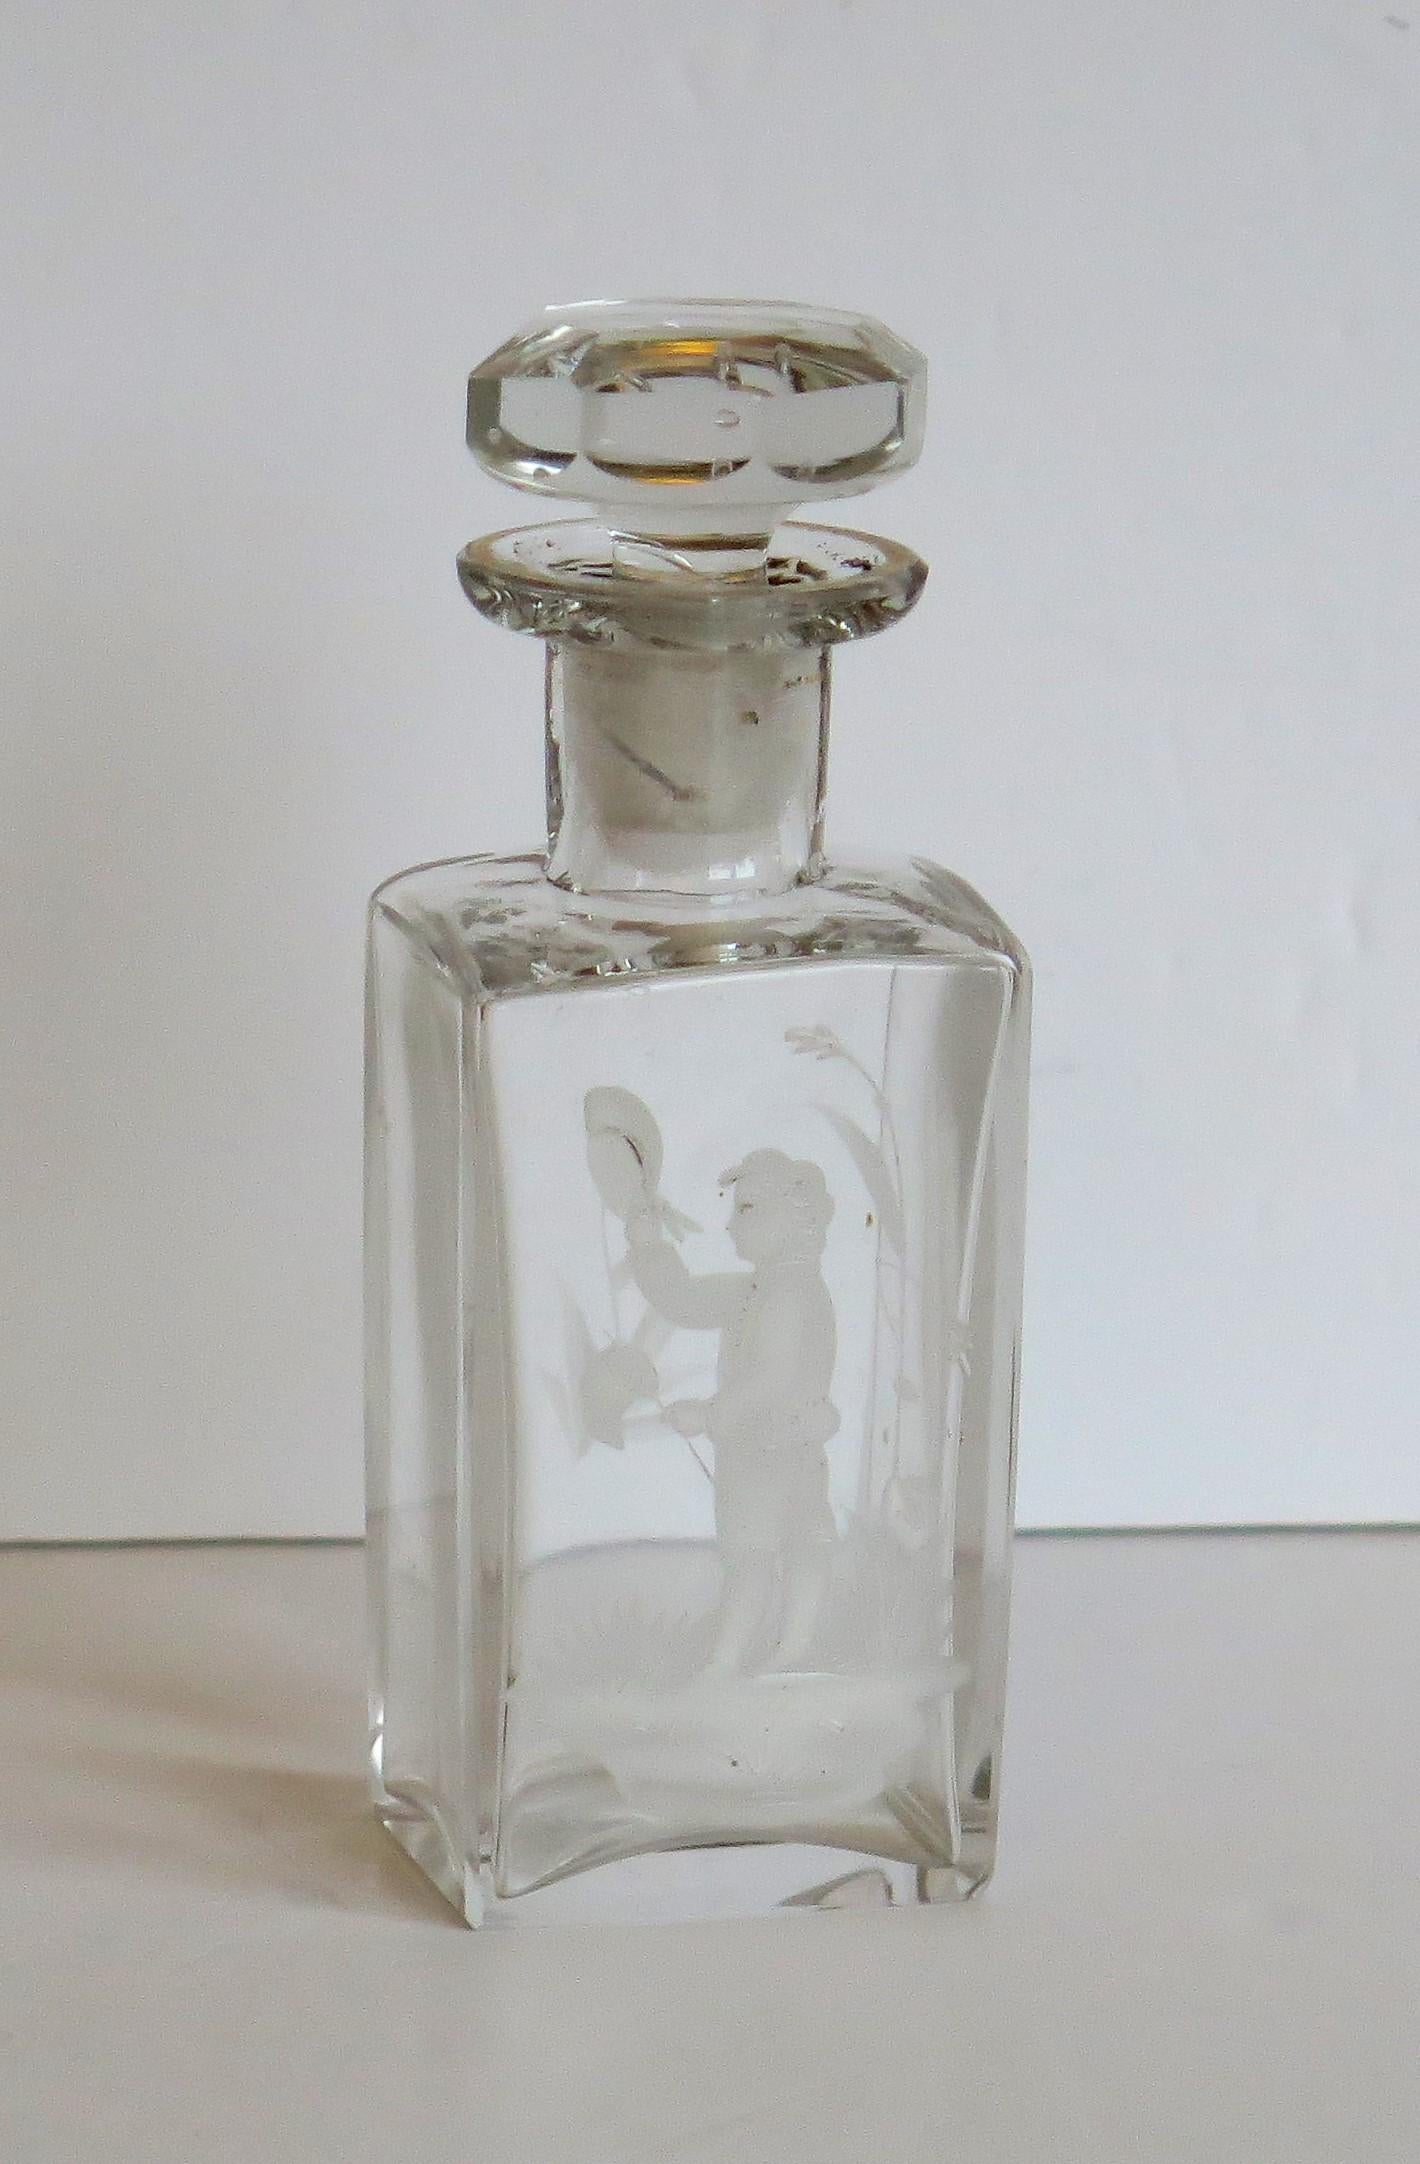 This is a beautiful clear glass perfume or scent bottle with 